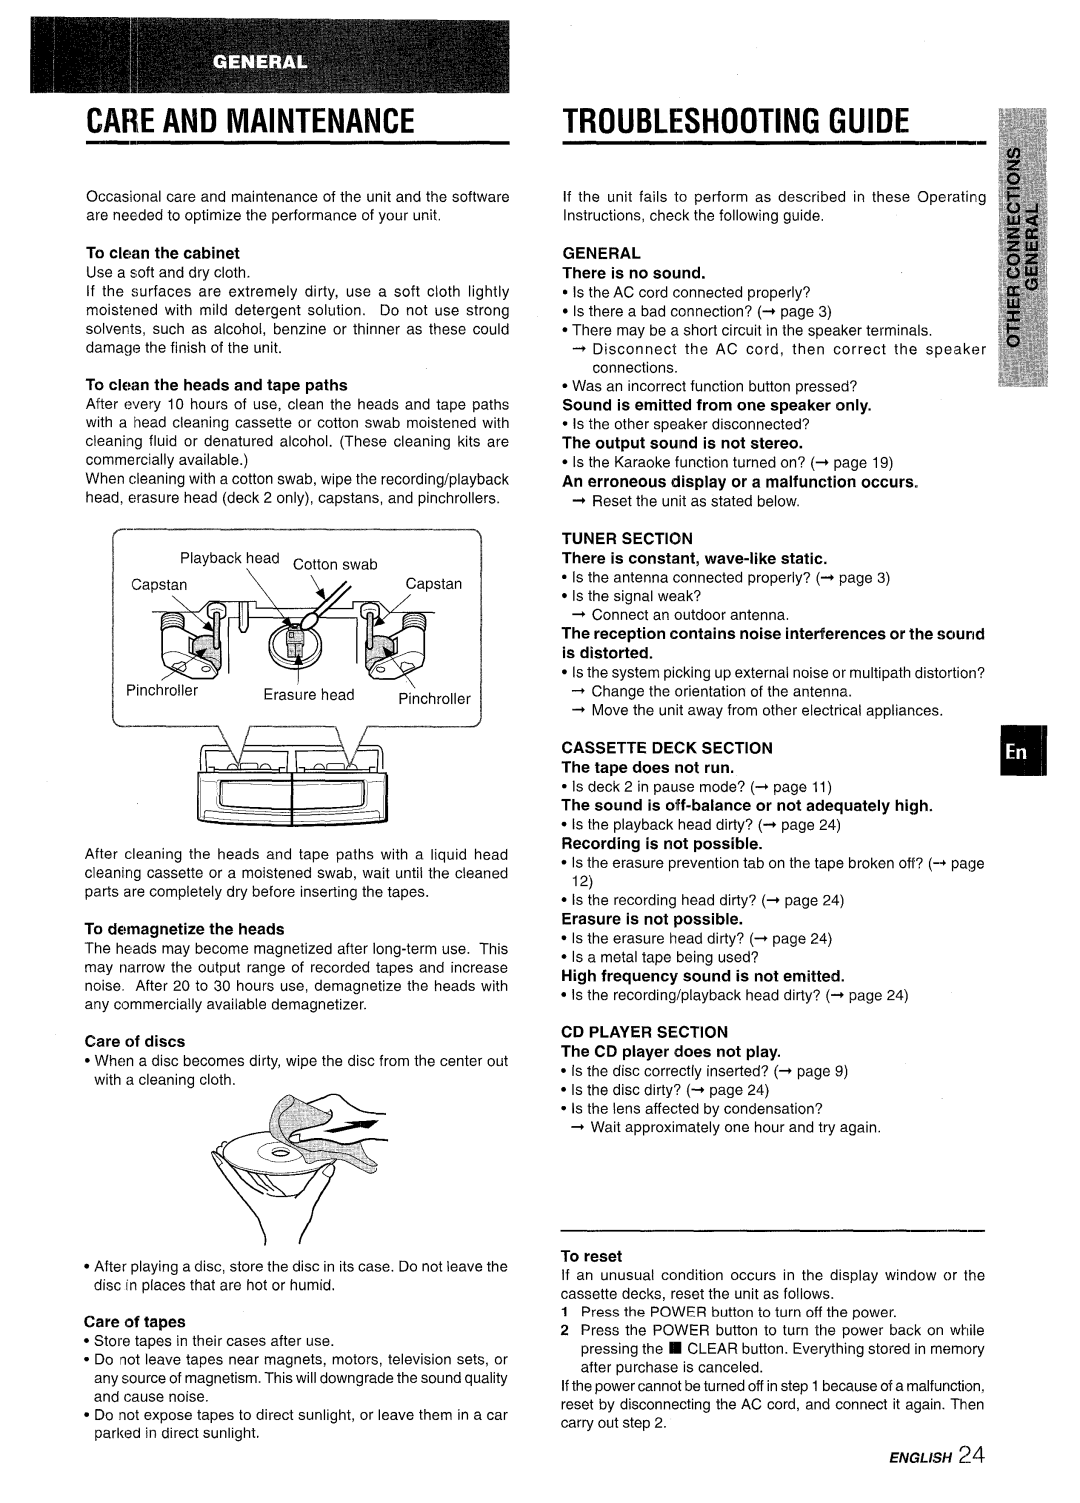 Aiwa CX-NMT50 Care And Maintenance, Troubleshooting Guide, To clean the cabinet Use a soft and dry cloth, Care of discs 